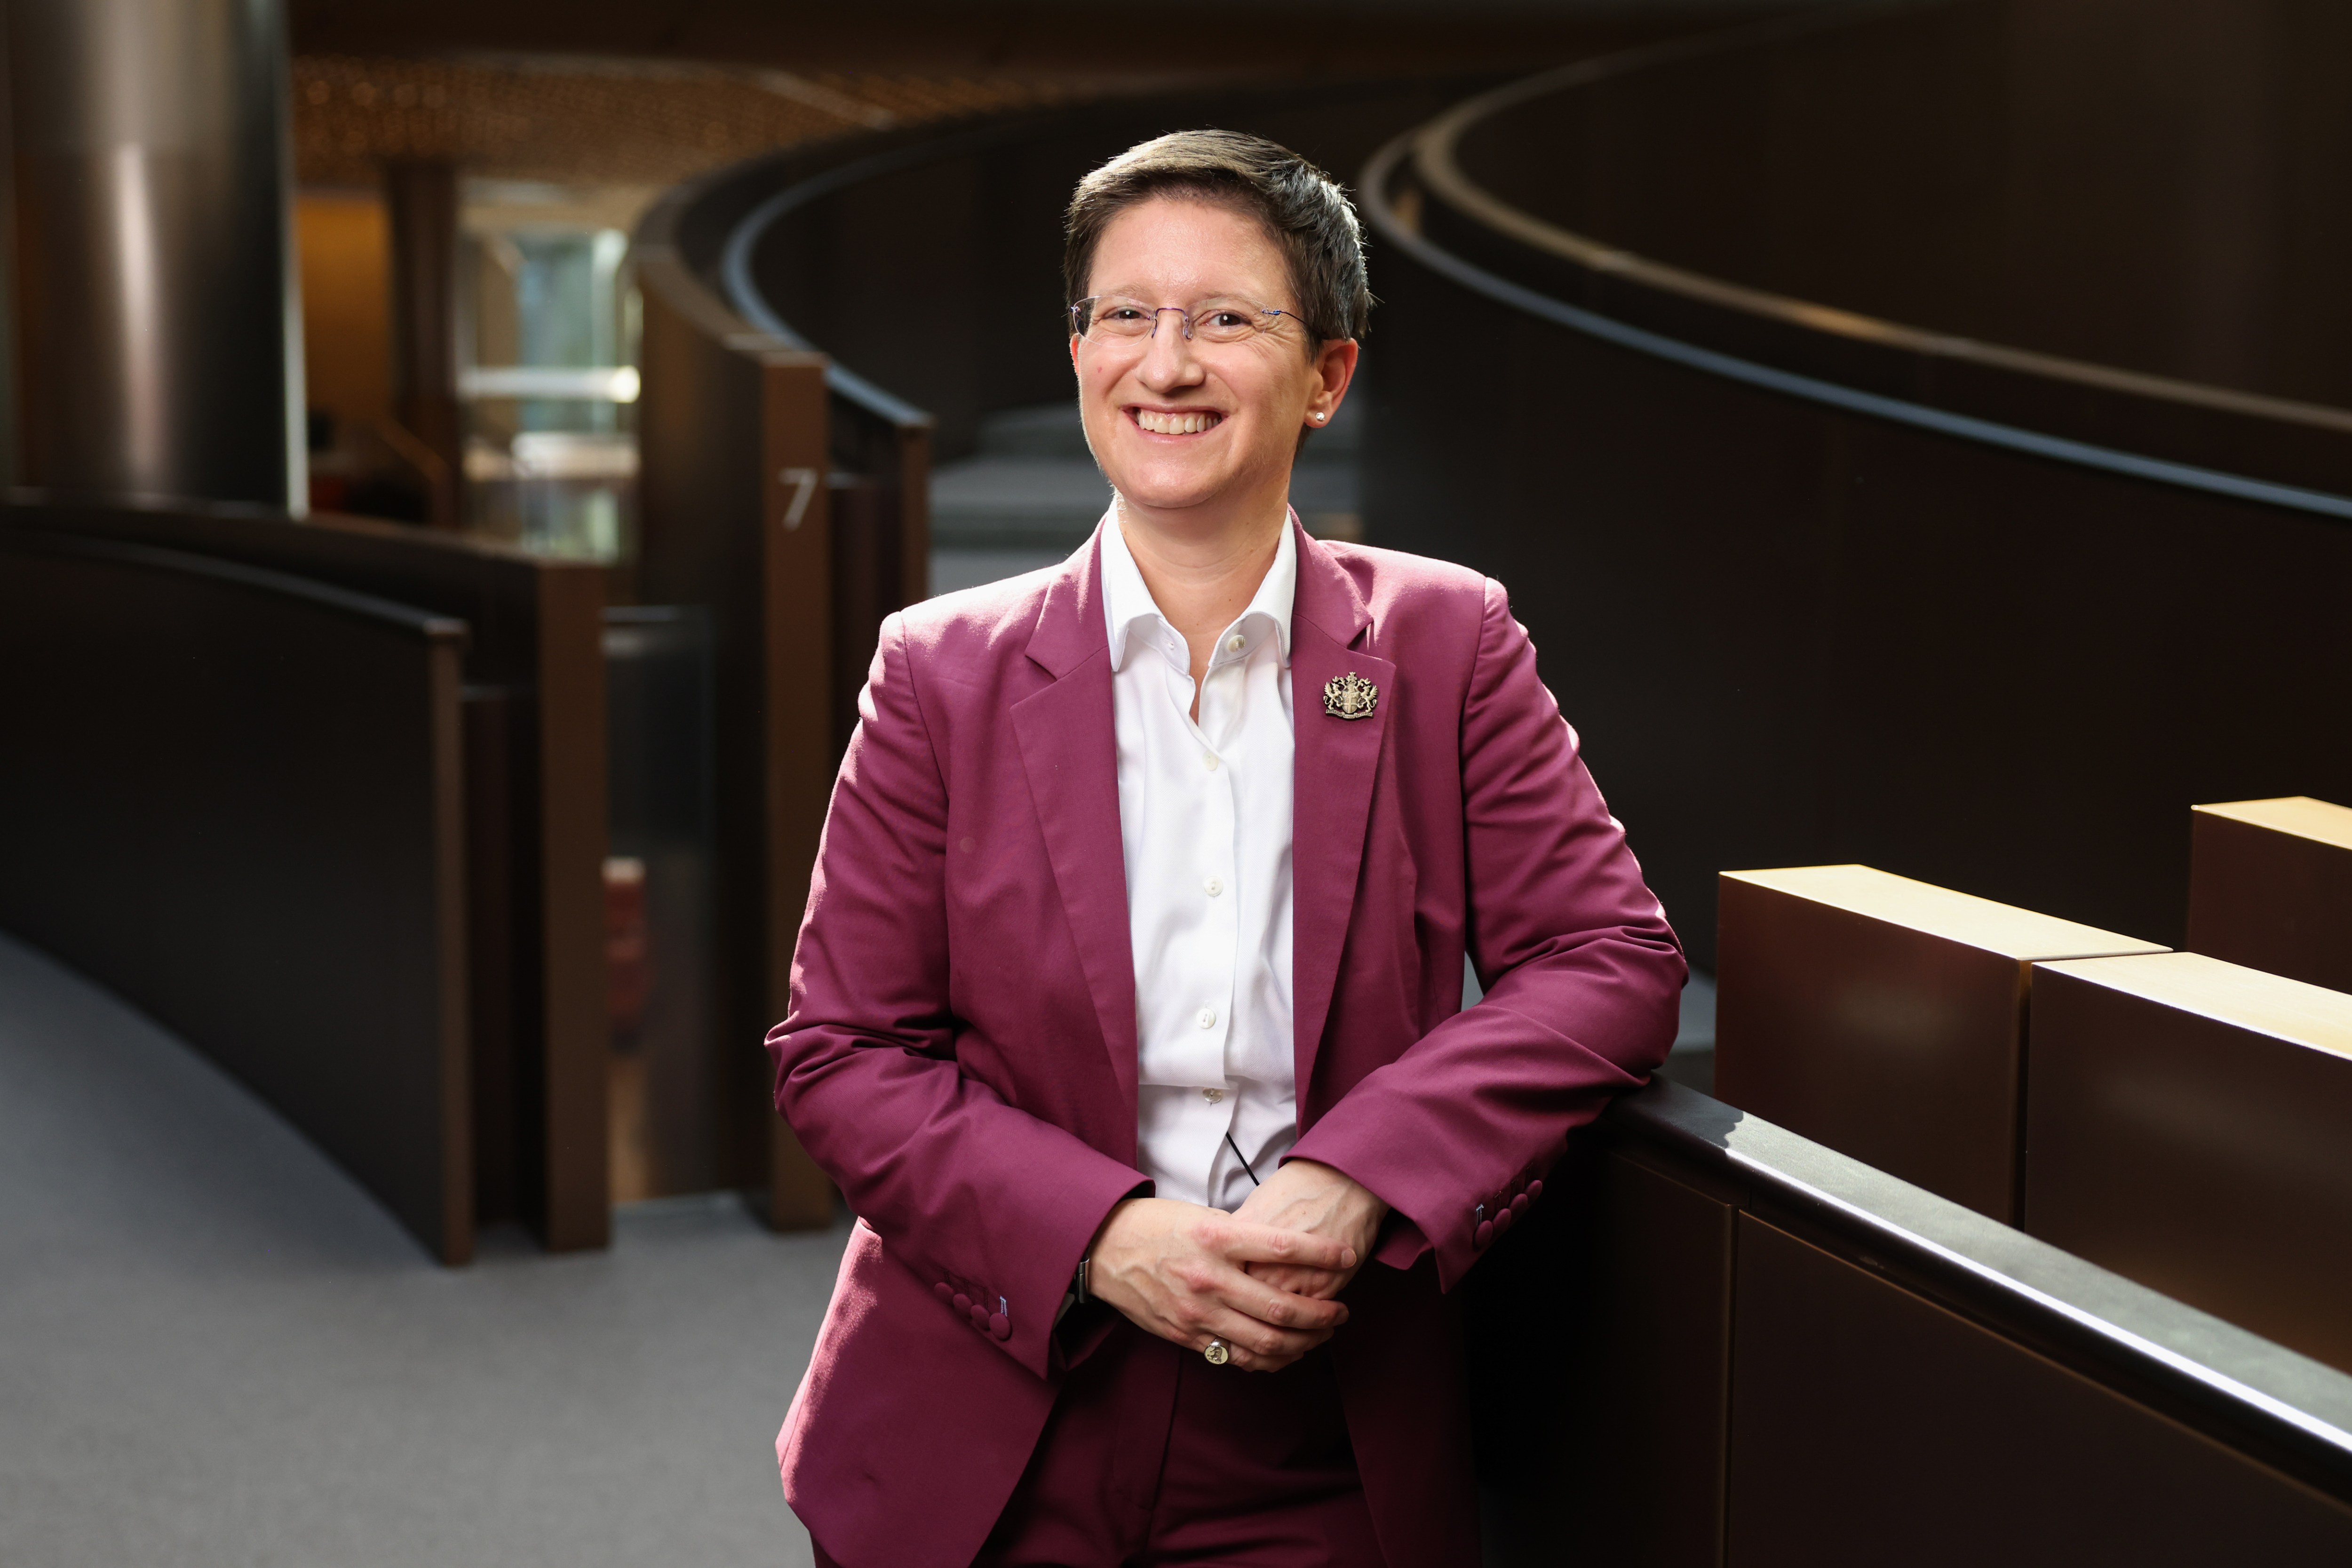 Julia Hoggett, chief executive of the London Stock Exchange, has been appointed a dame